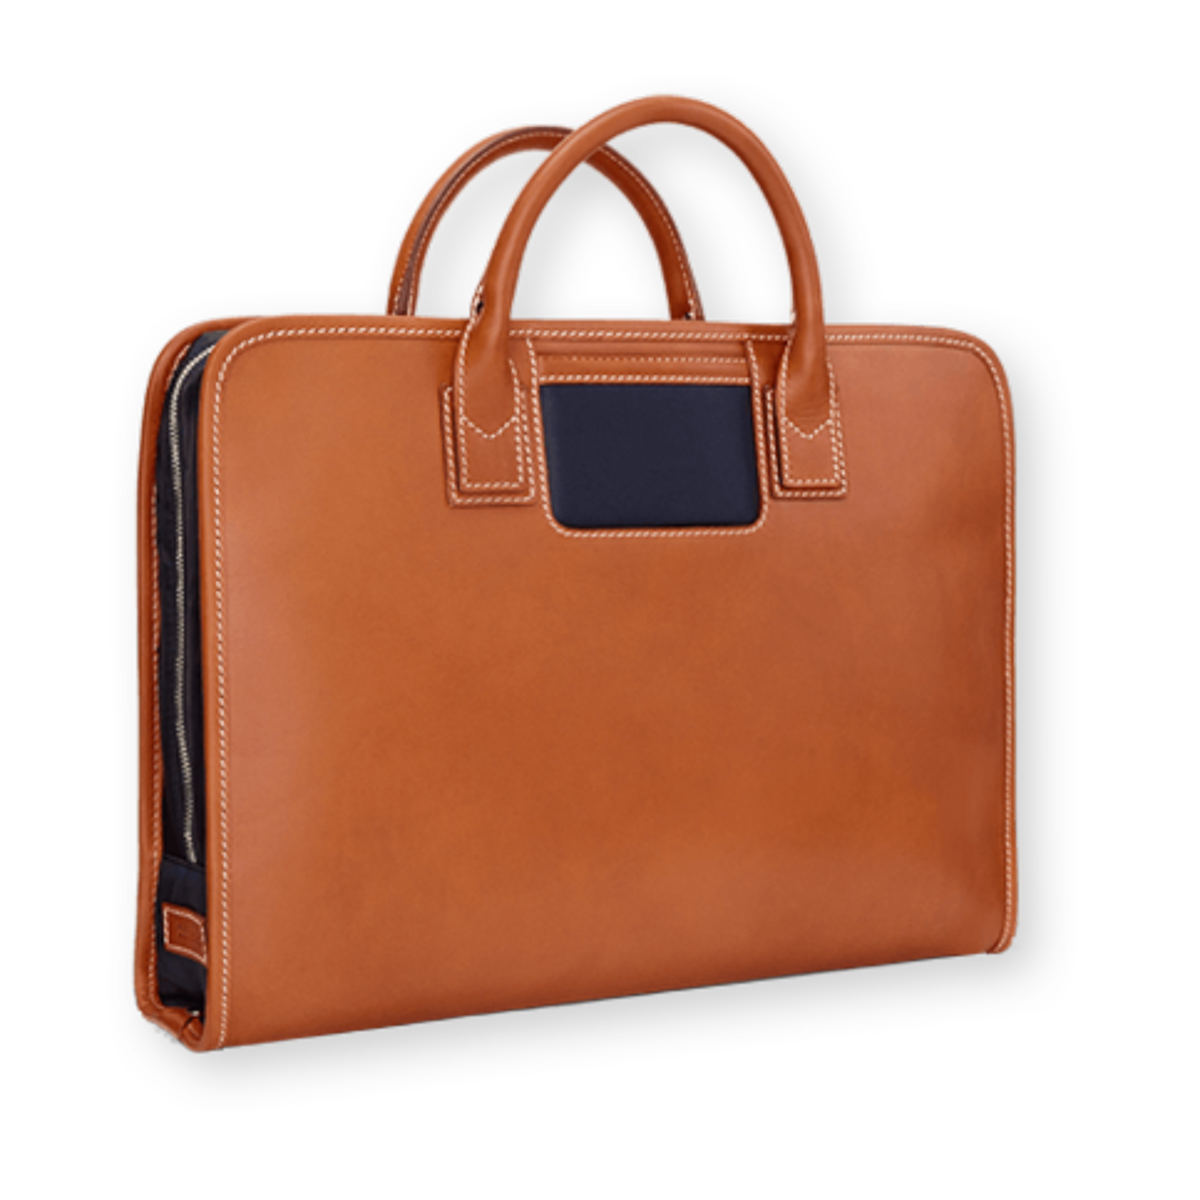 Travelteq - The Briefcase (Cognac/Navy), Bags | NEW TAILOR Webshop